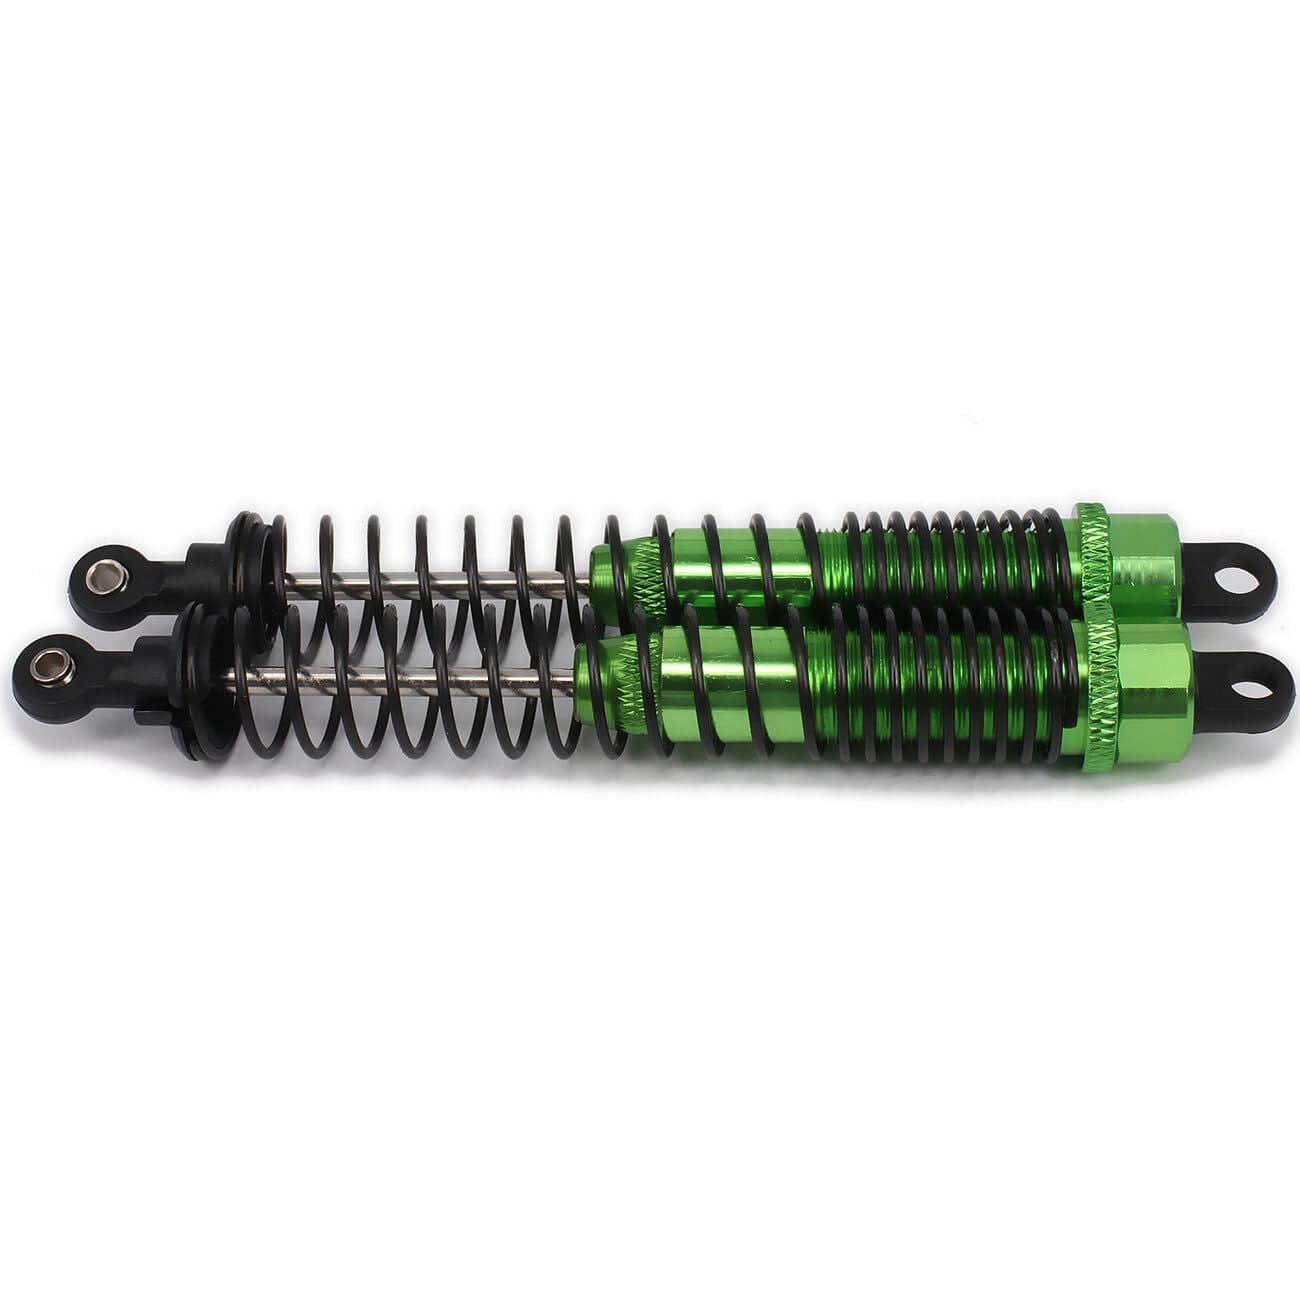 RCAWD RC CAR UPGRADE PARTS Green RCAWD Adjustable 130mm RC Shock Absorber Damper For RC Car 1/10 Model Car 2PCS